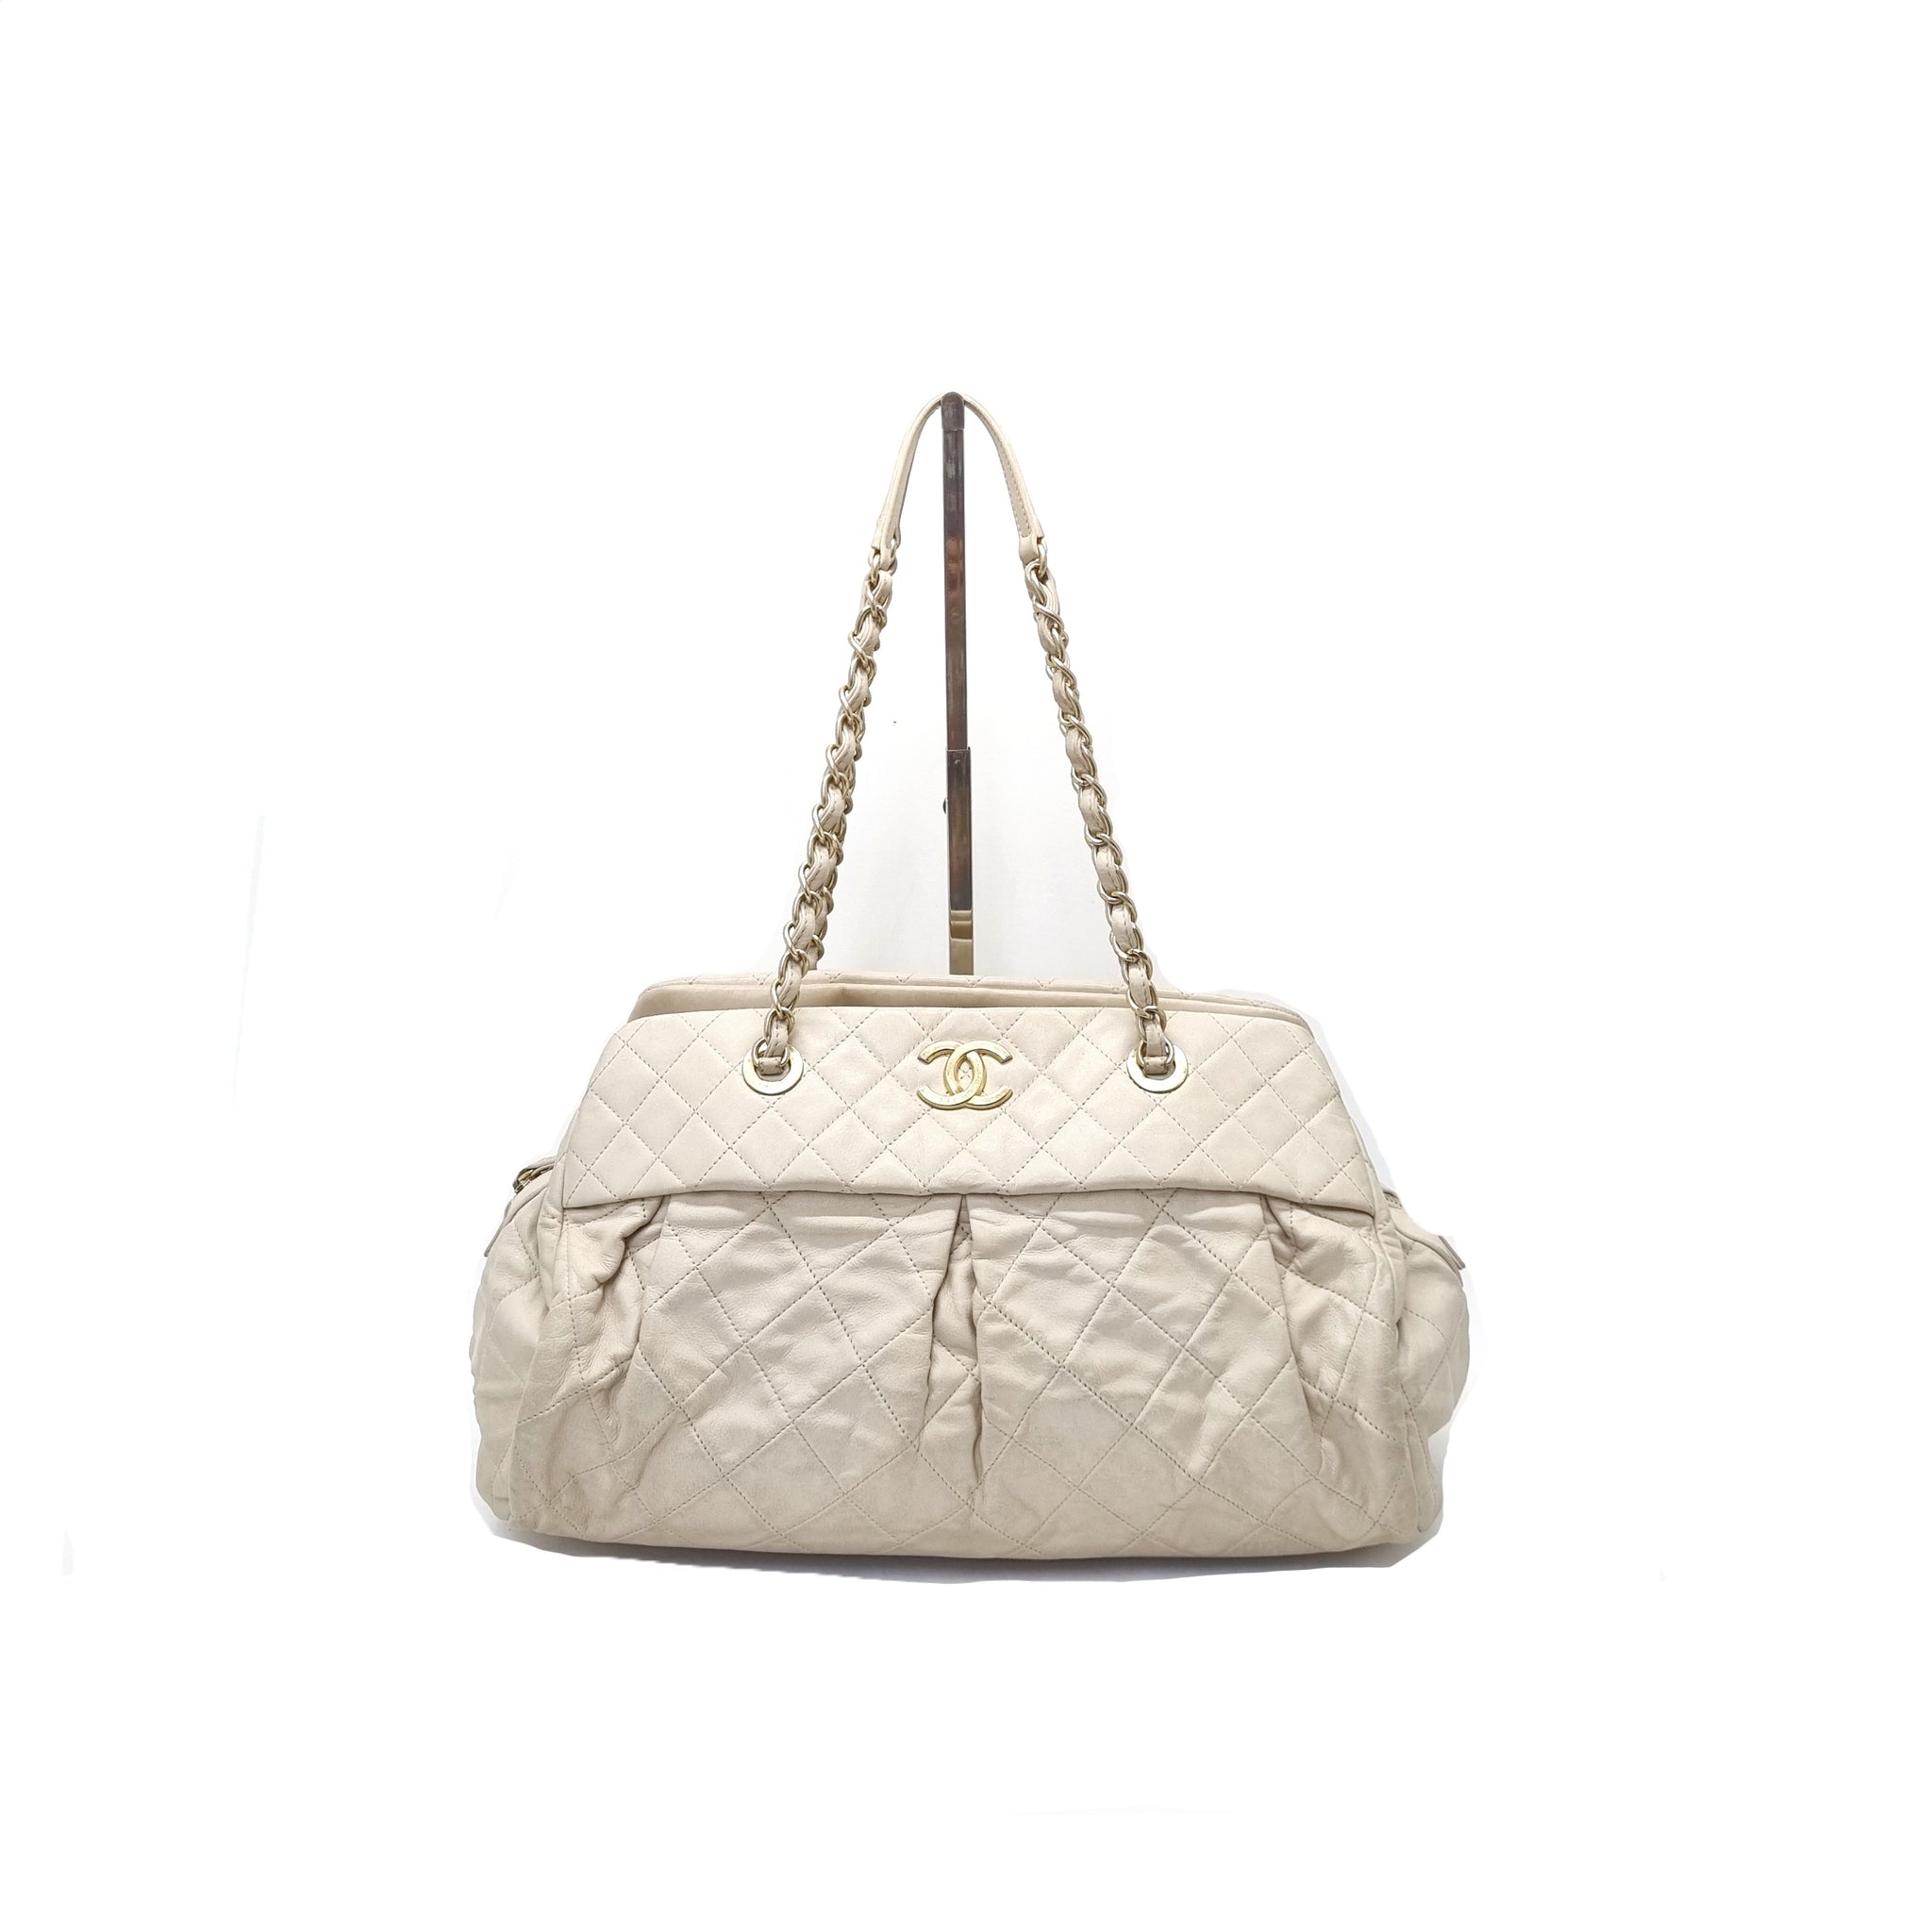 Chanel Chic Quilt Iridescent Calfskin Large Bowling Bag Ghw (Ivory)